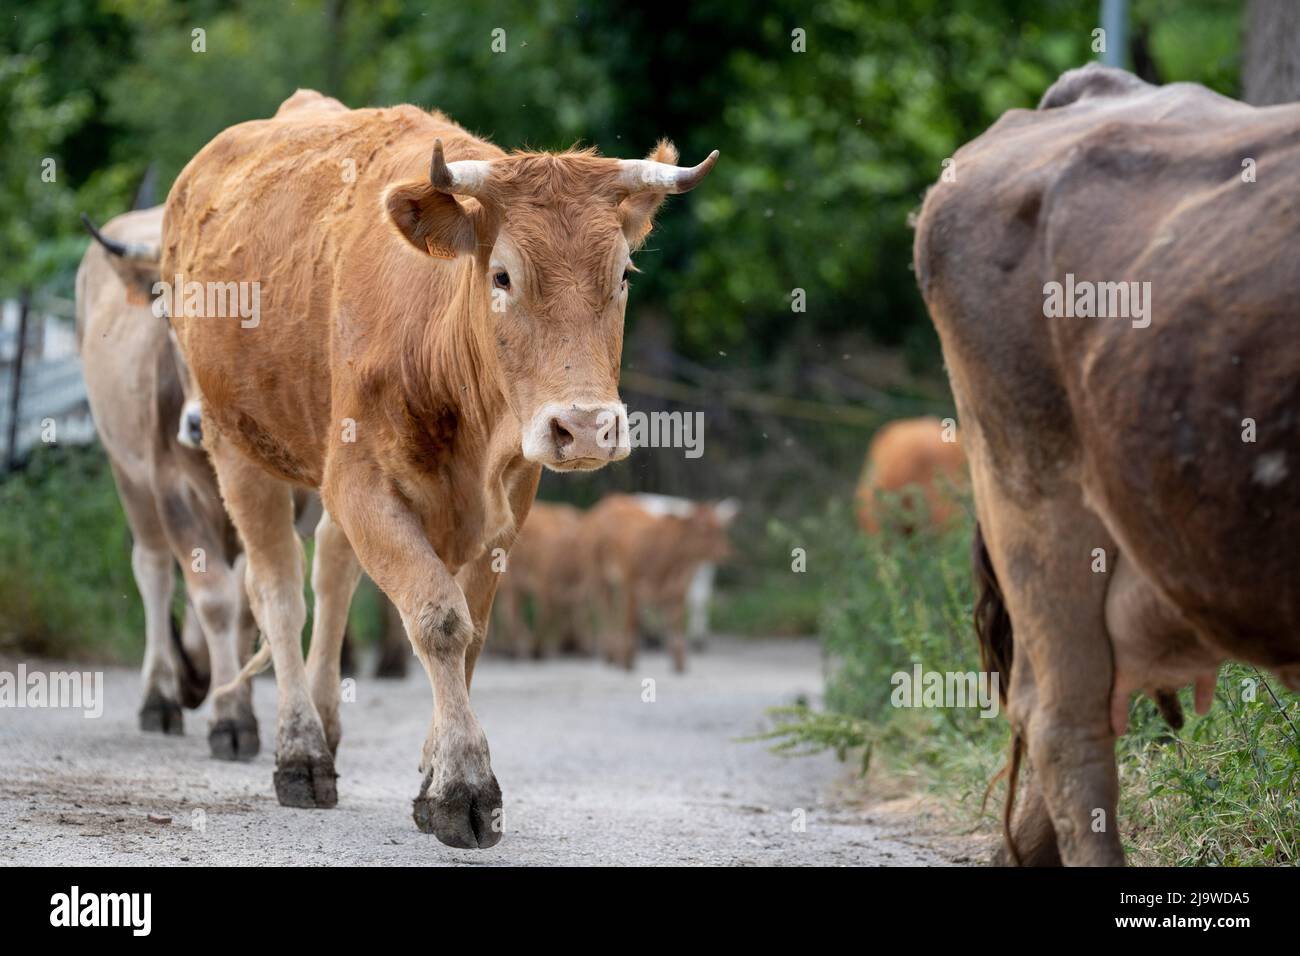 Dairy cows walk up a track in the foothills below Spanish mountain peaks, at the hamlet of Lon near Potes, a popular tourist gateway for those entering the Spanish Picos de Europa National Park region, on 17th May 2022, Lon, Asturias, Spain. Stock Photo